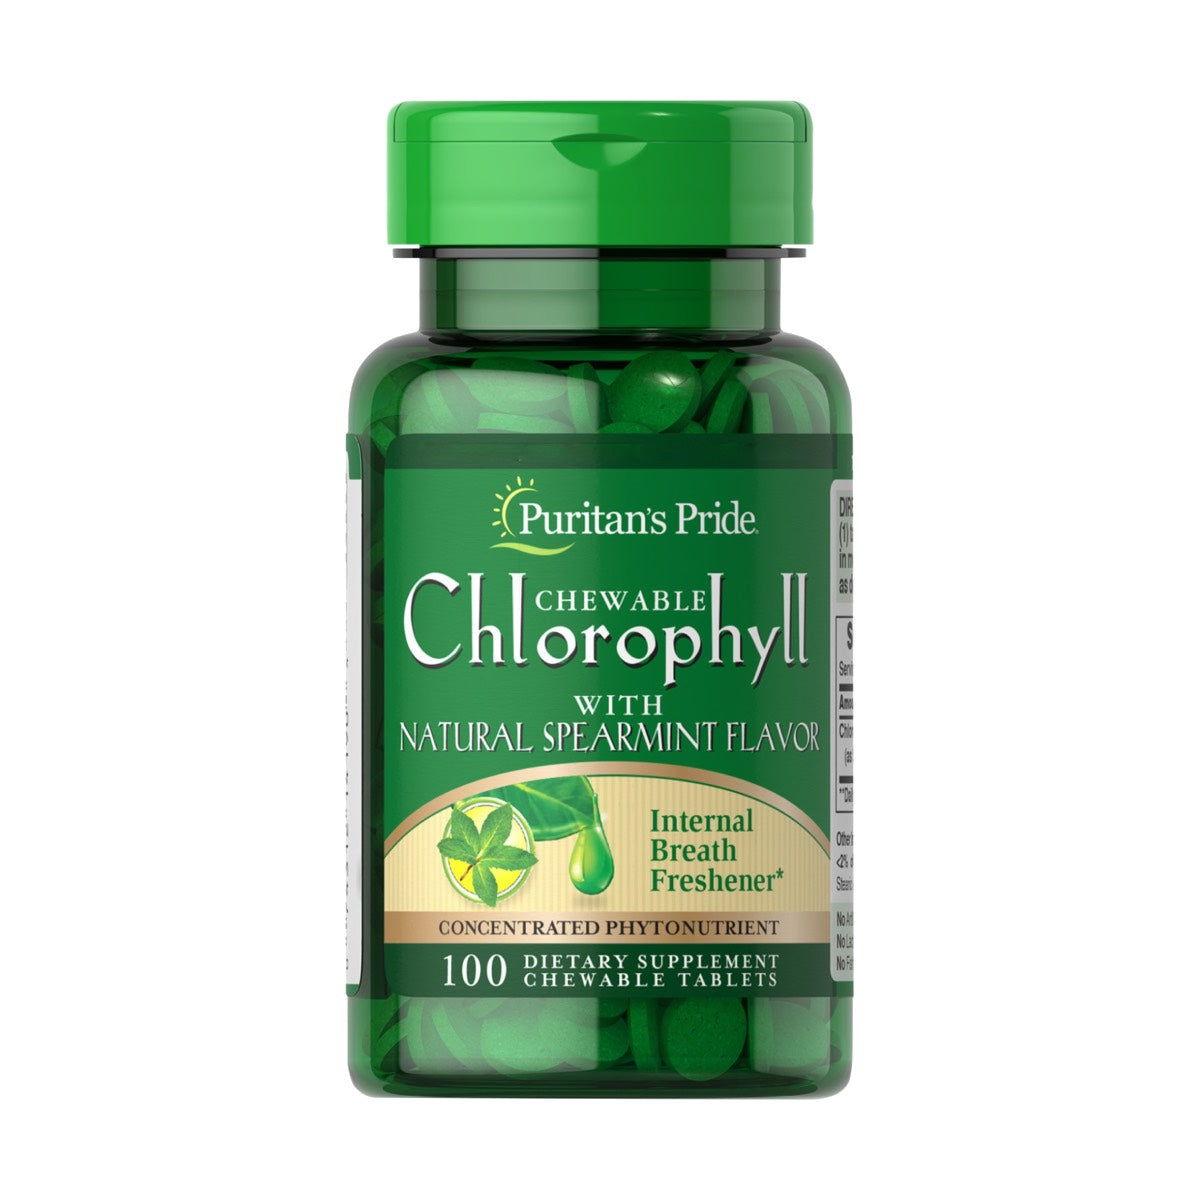 Puritan's Pride, Chewable Chlorophyll with Natural Spearmint Flavor